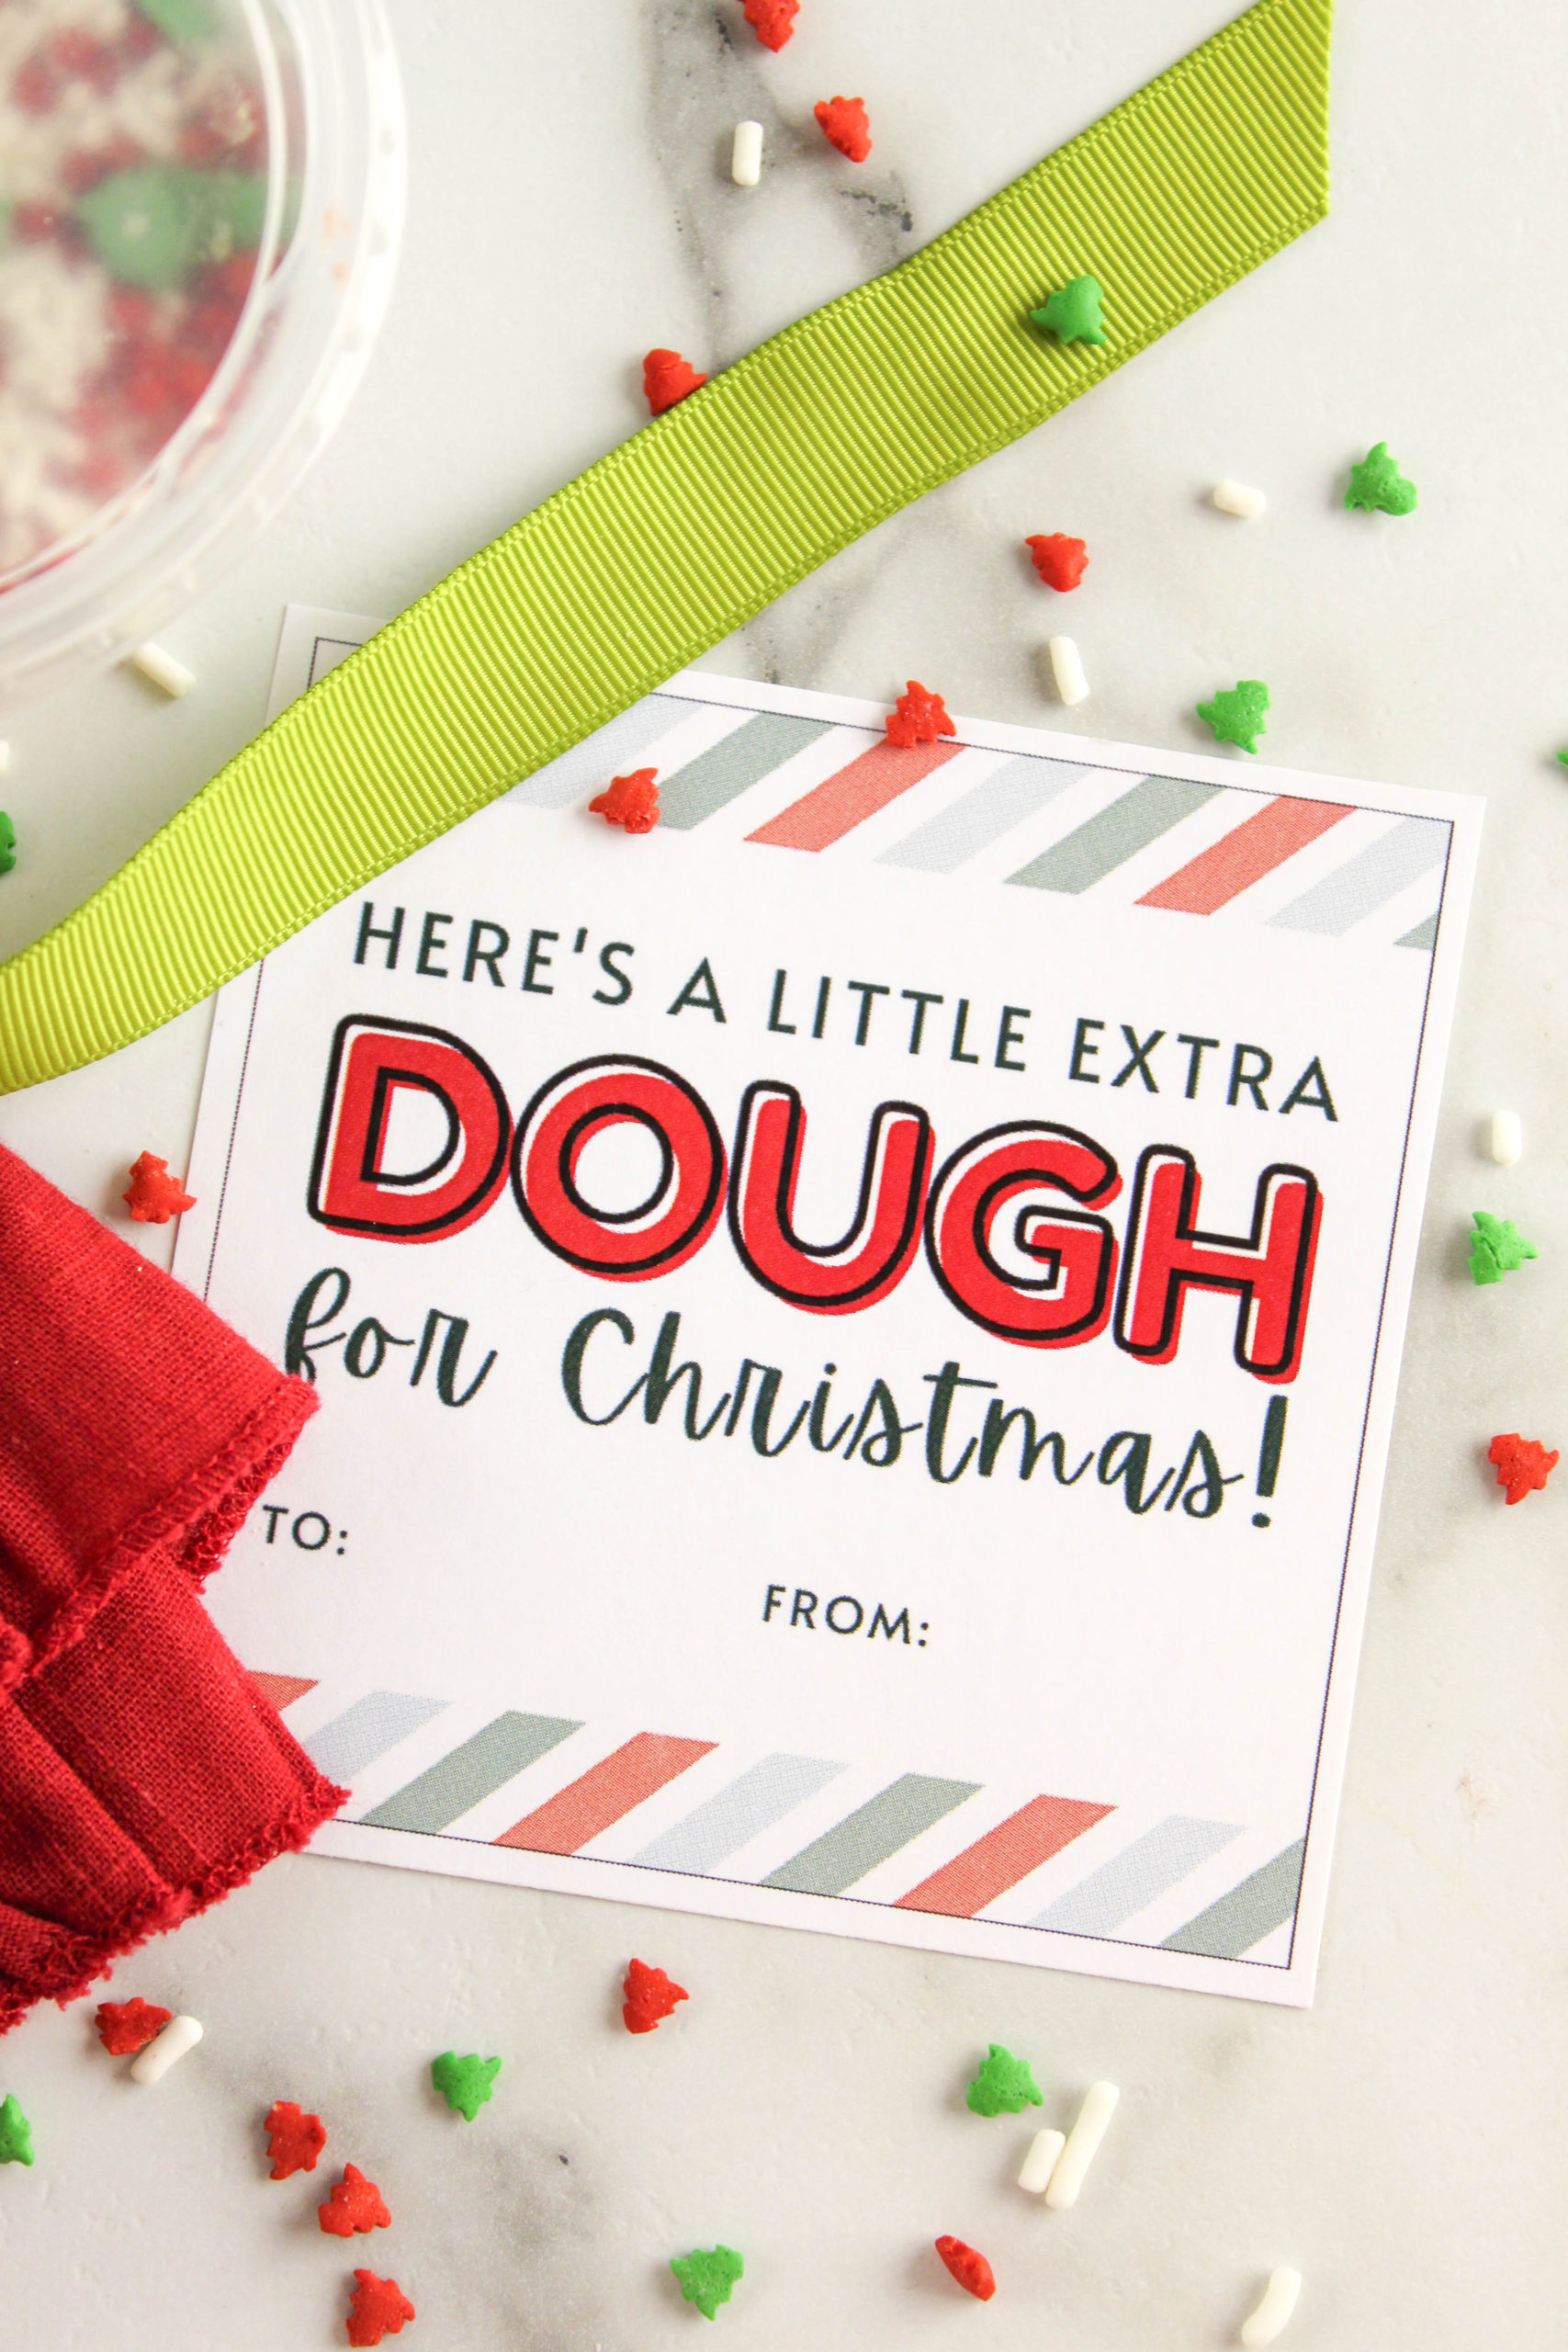 a-little-extra-dough-for-christmas-free-printable-gift-tag-baking-you